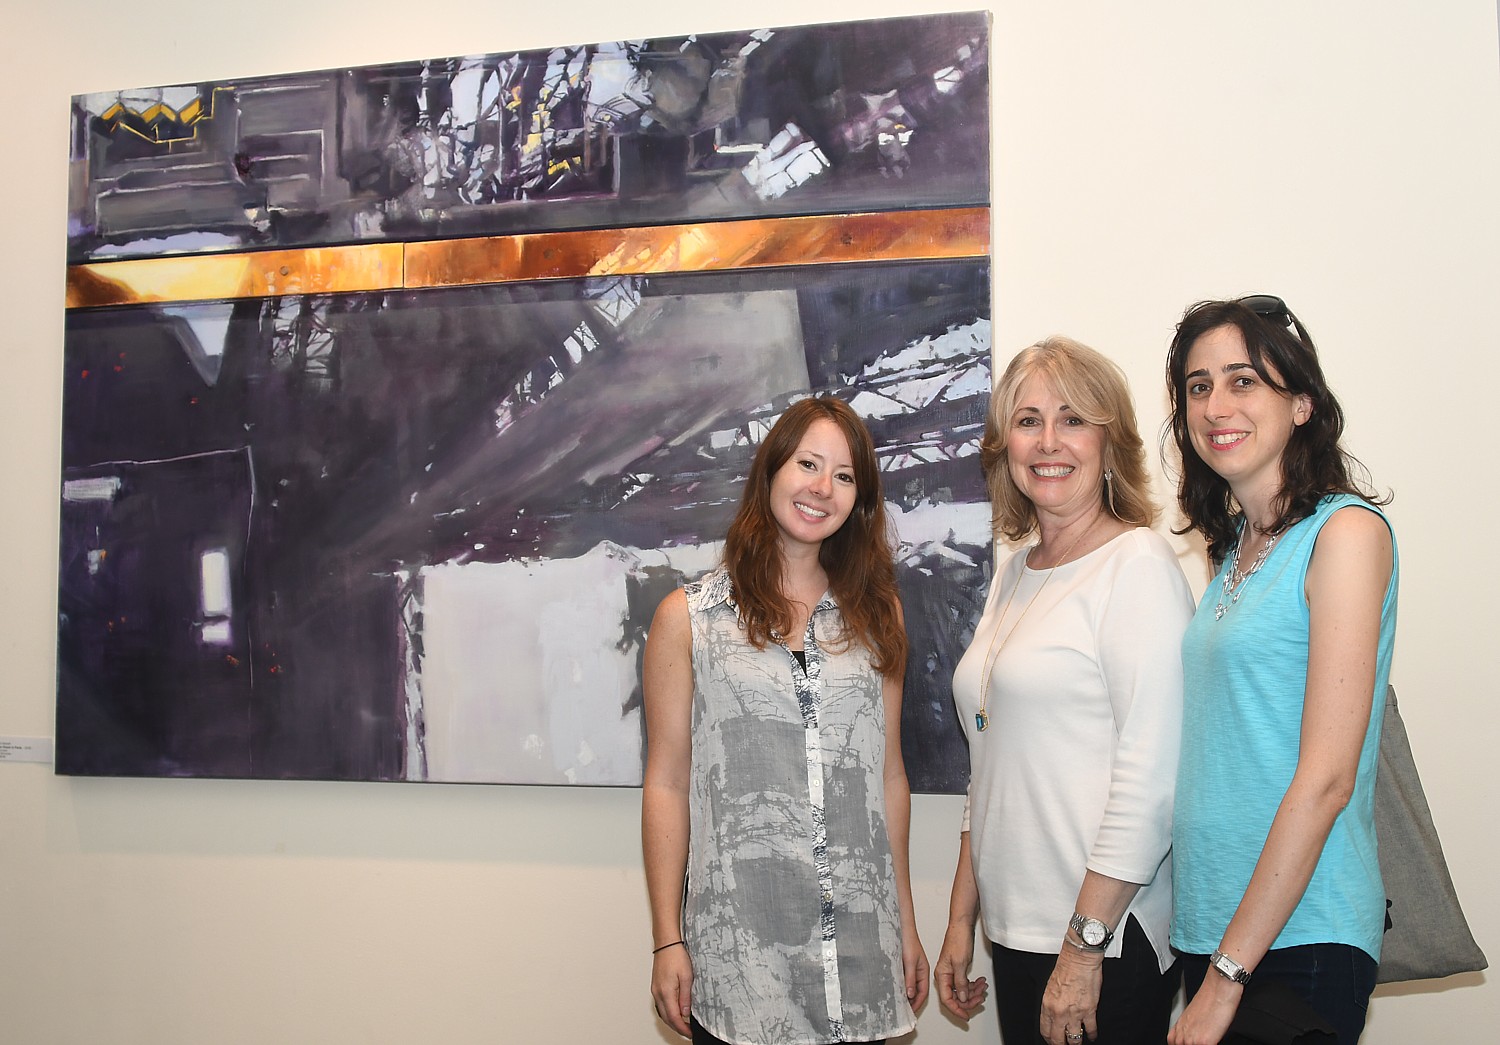 Gold Coast Arts Center Director Regina Gil and Alexandra Gil who curates the Shorts Films in the Gold Coast International Film Festival, with artist Laini Nemett and her painted perspective of the Eiffel Tower © 2016 Karen Rubin/goingplacesfarandnear.com